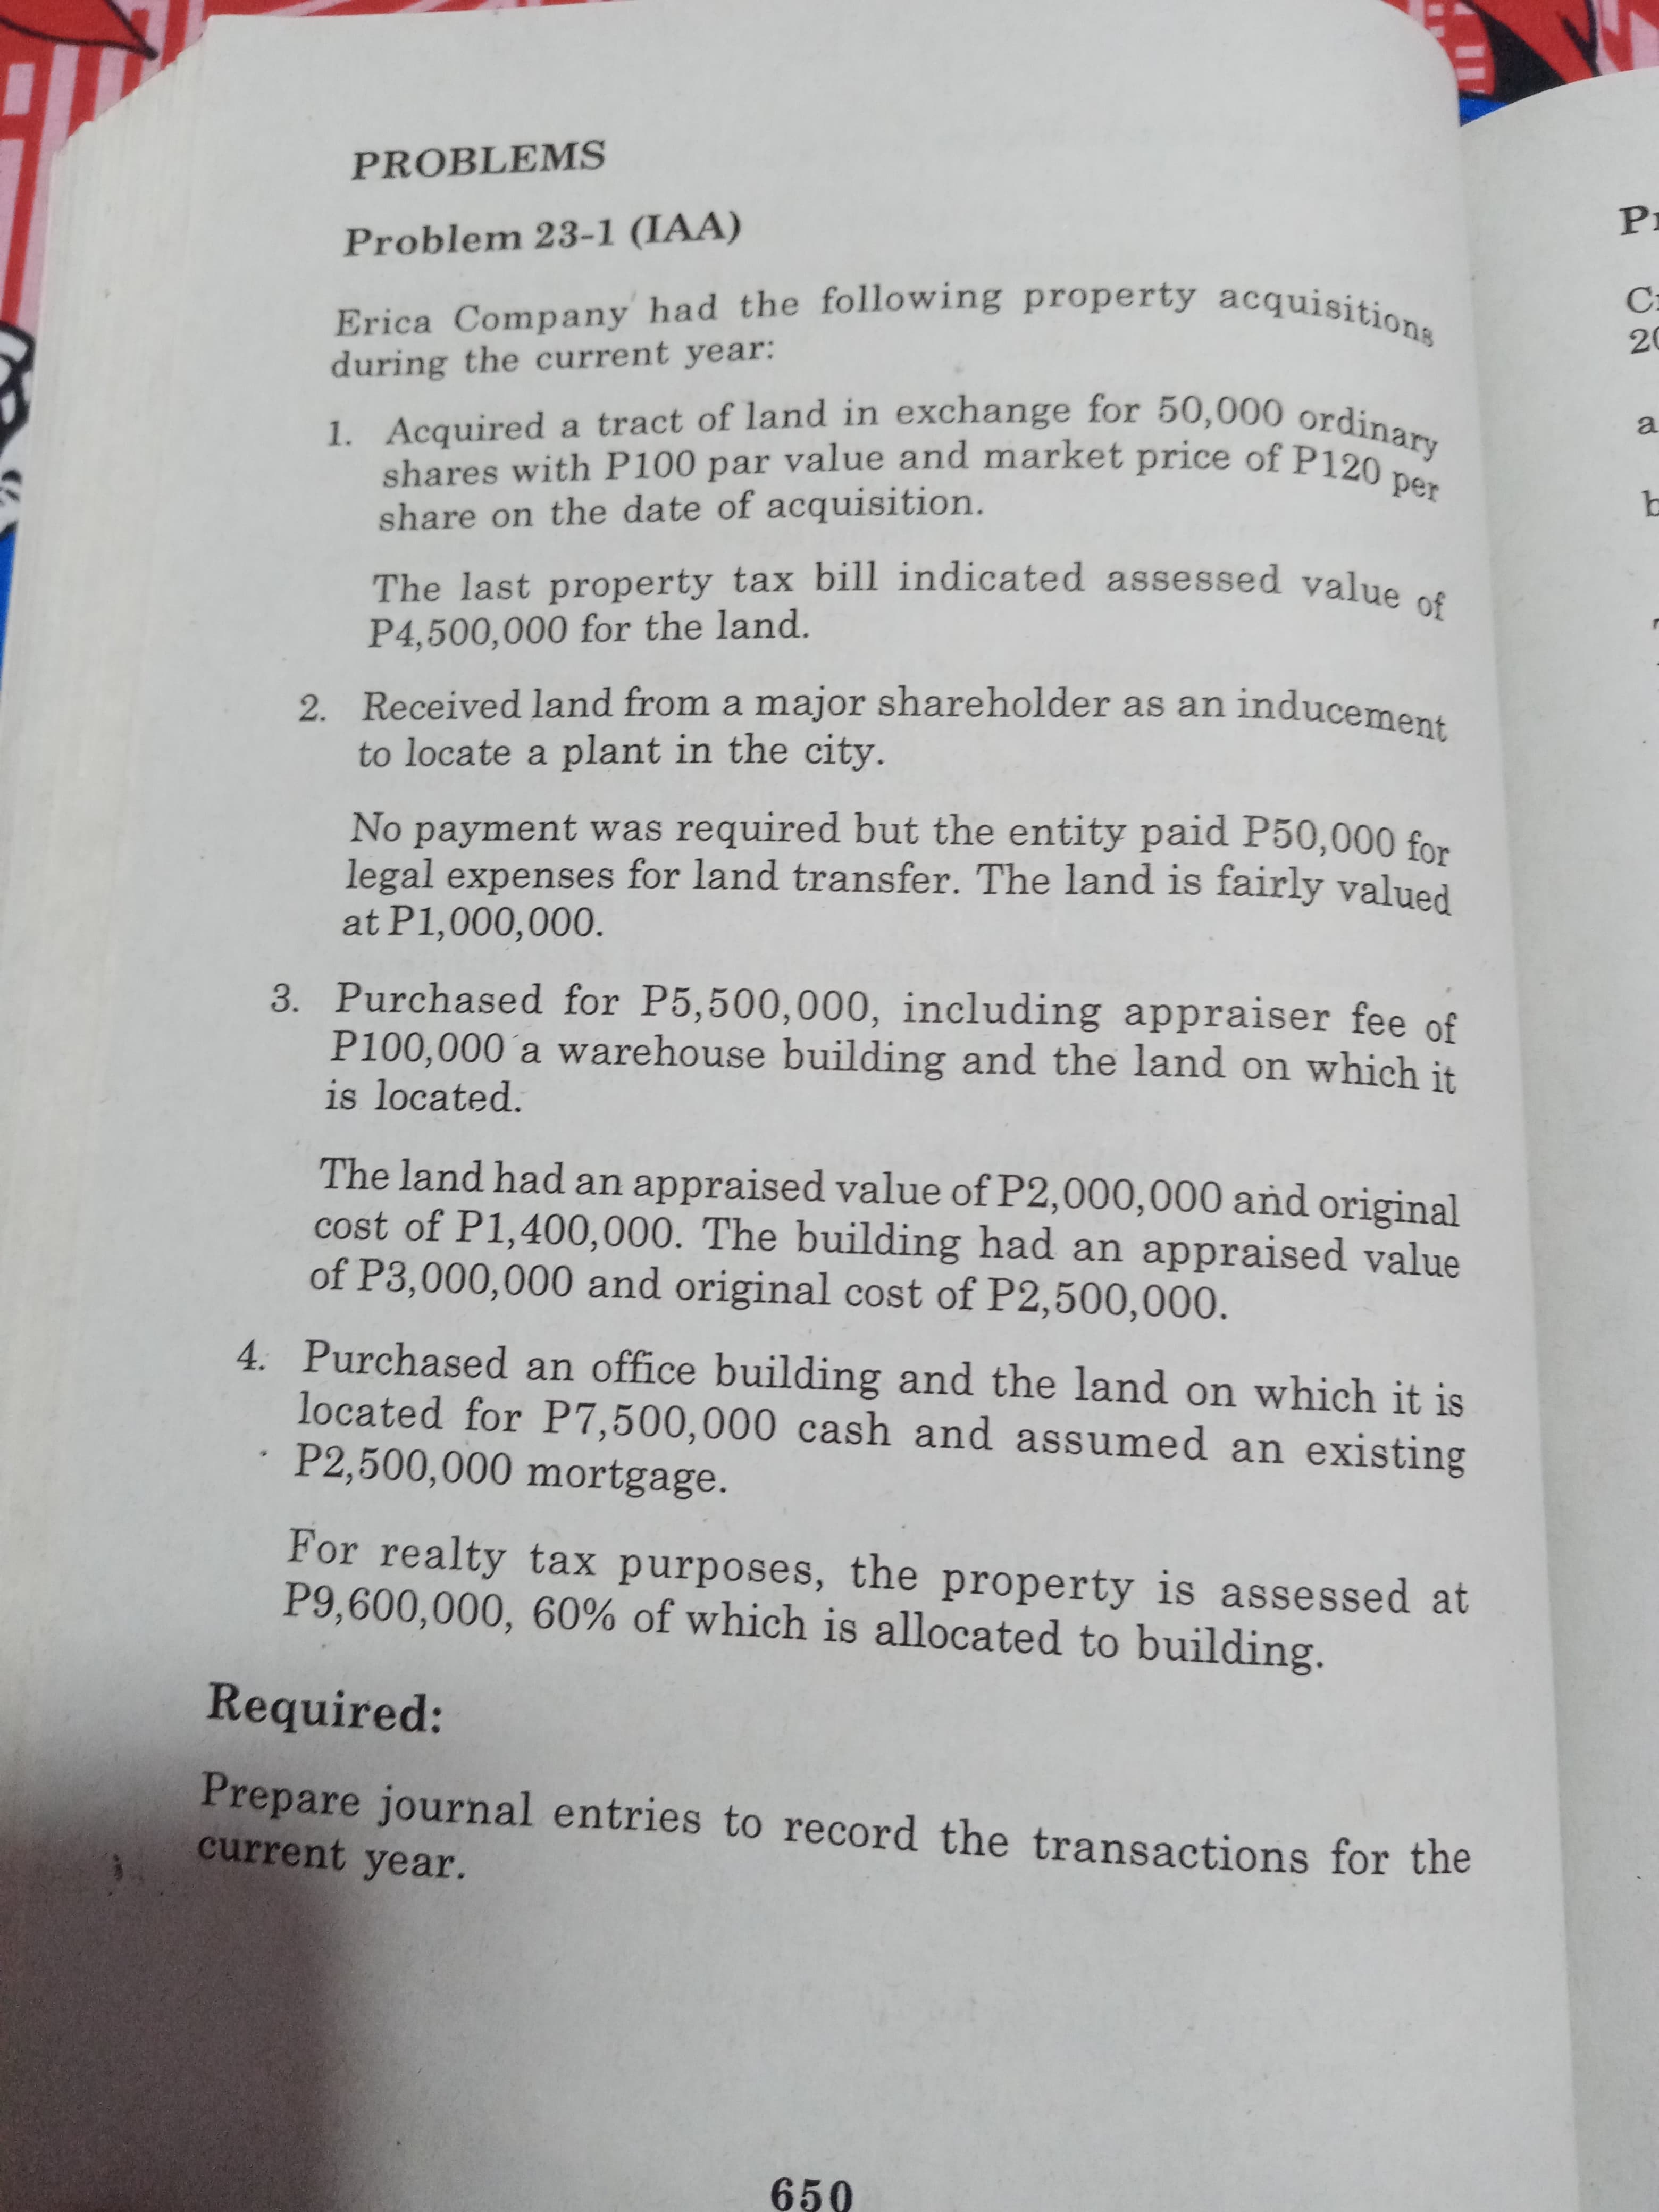 Erica Company had the following property acquisitions
during the current year:
1. Acquired a tract of land in exchange for 50,000 ordinary
shares with P100 par value and market price of P120
share on the date of acquisition.
per
The last property tax bill indicated assessed value of
P4,500,000 for the land.
2. Received land from a major shareholder as an inducement
to locate a plant in the city.
No payment was required but the entity paid P50,000 for
legal expenses for land transfer. The land is fairly valued
at P1,000,000.
3. Purchased for P5,500,000, including appraiser fee of
P100,000´a warehouse building and the land on which it
is located.
The land had an appraised value of P2,000,000 and original
cost of P1,400,000. The building had an appraised value
of P3,000,000 and original cost of P2,500,000.
